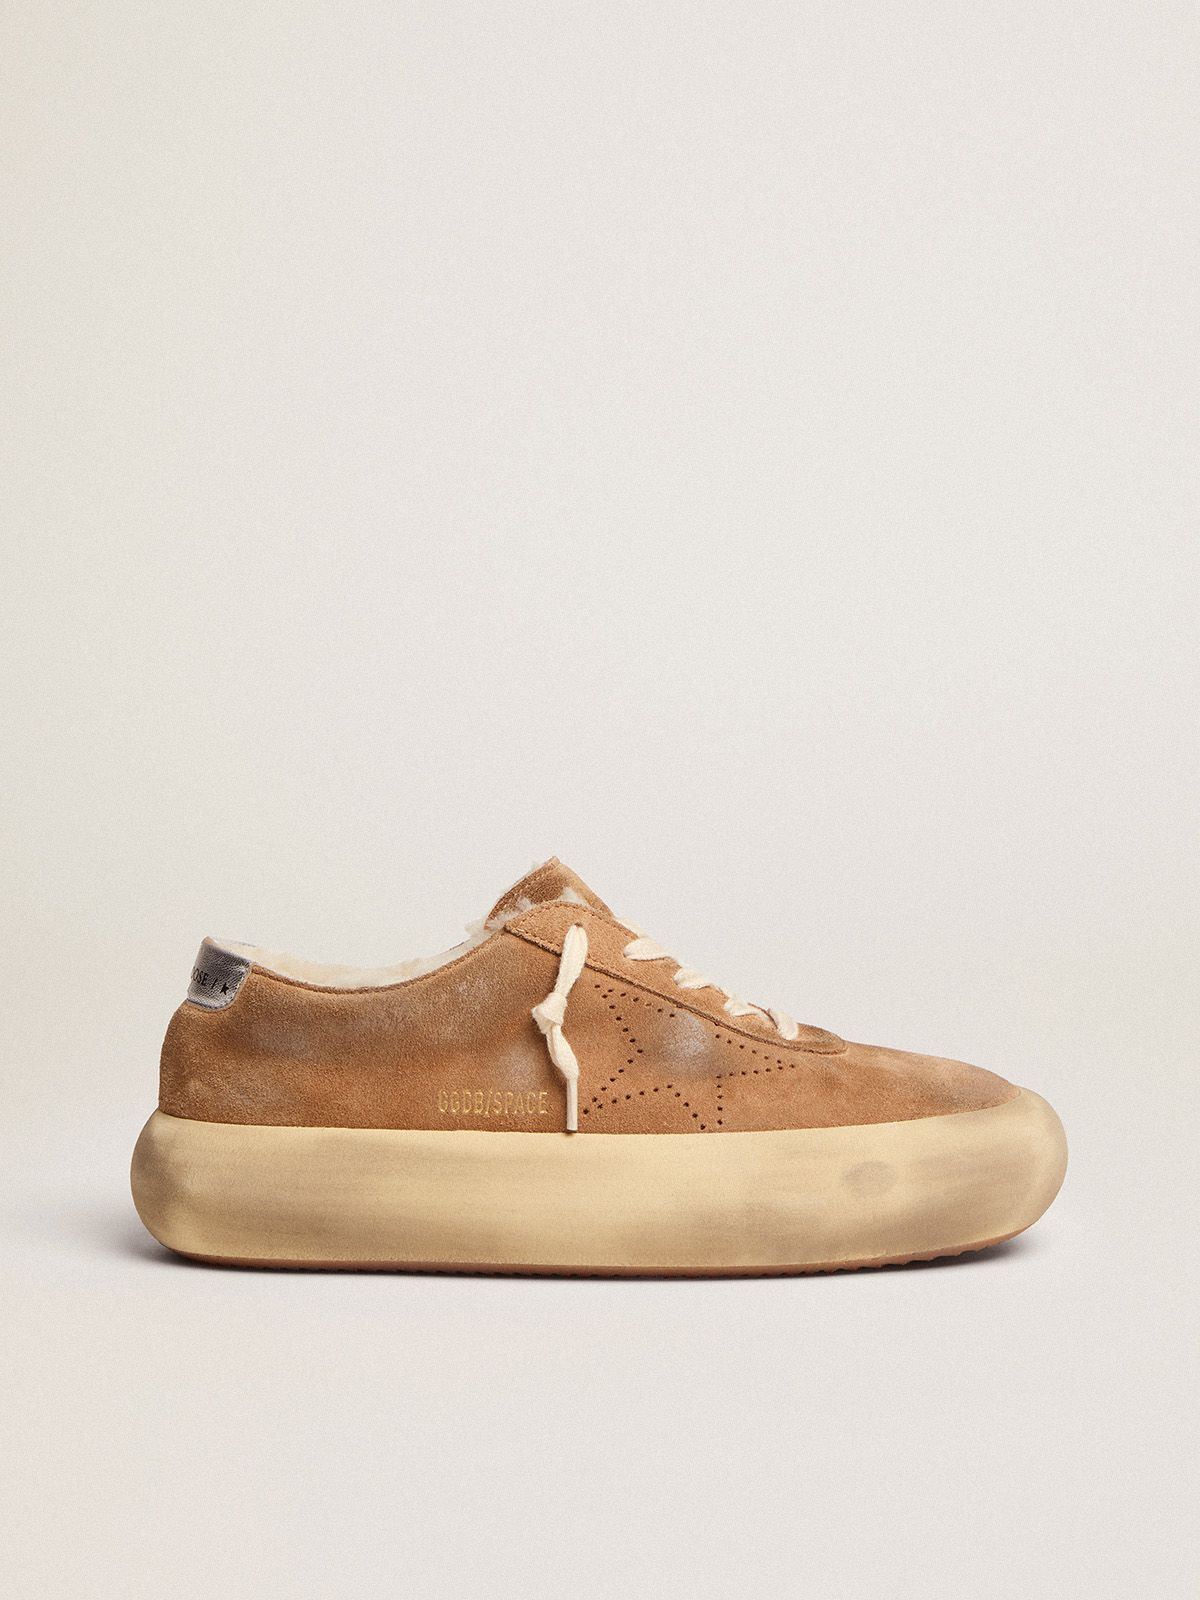 golden goose tobacco-colored with Space-Star shearling suede shoes lining in